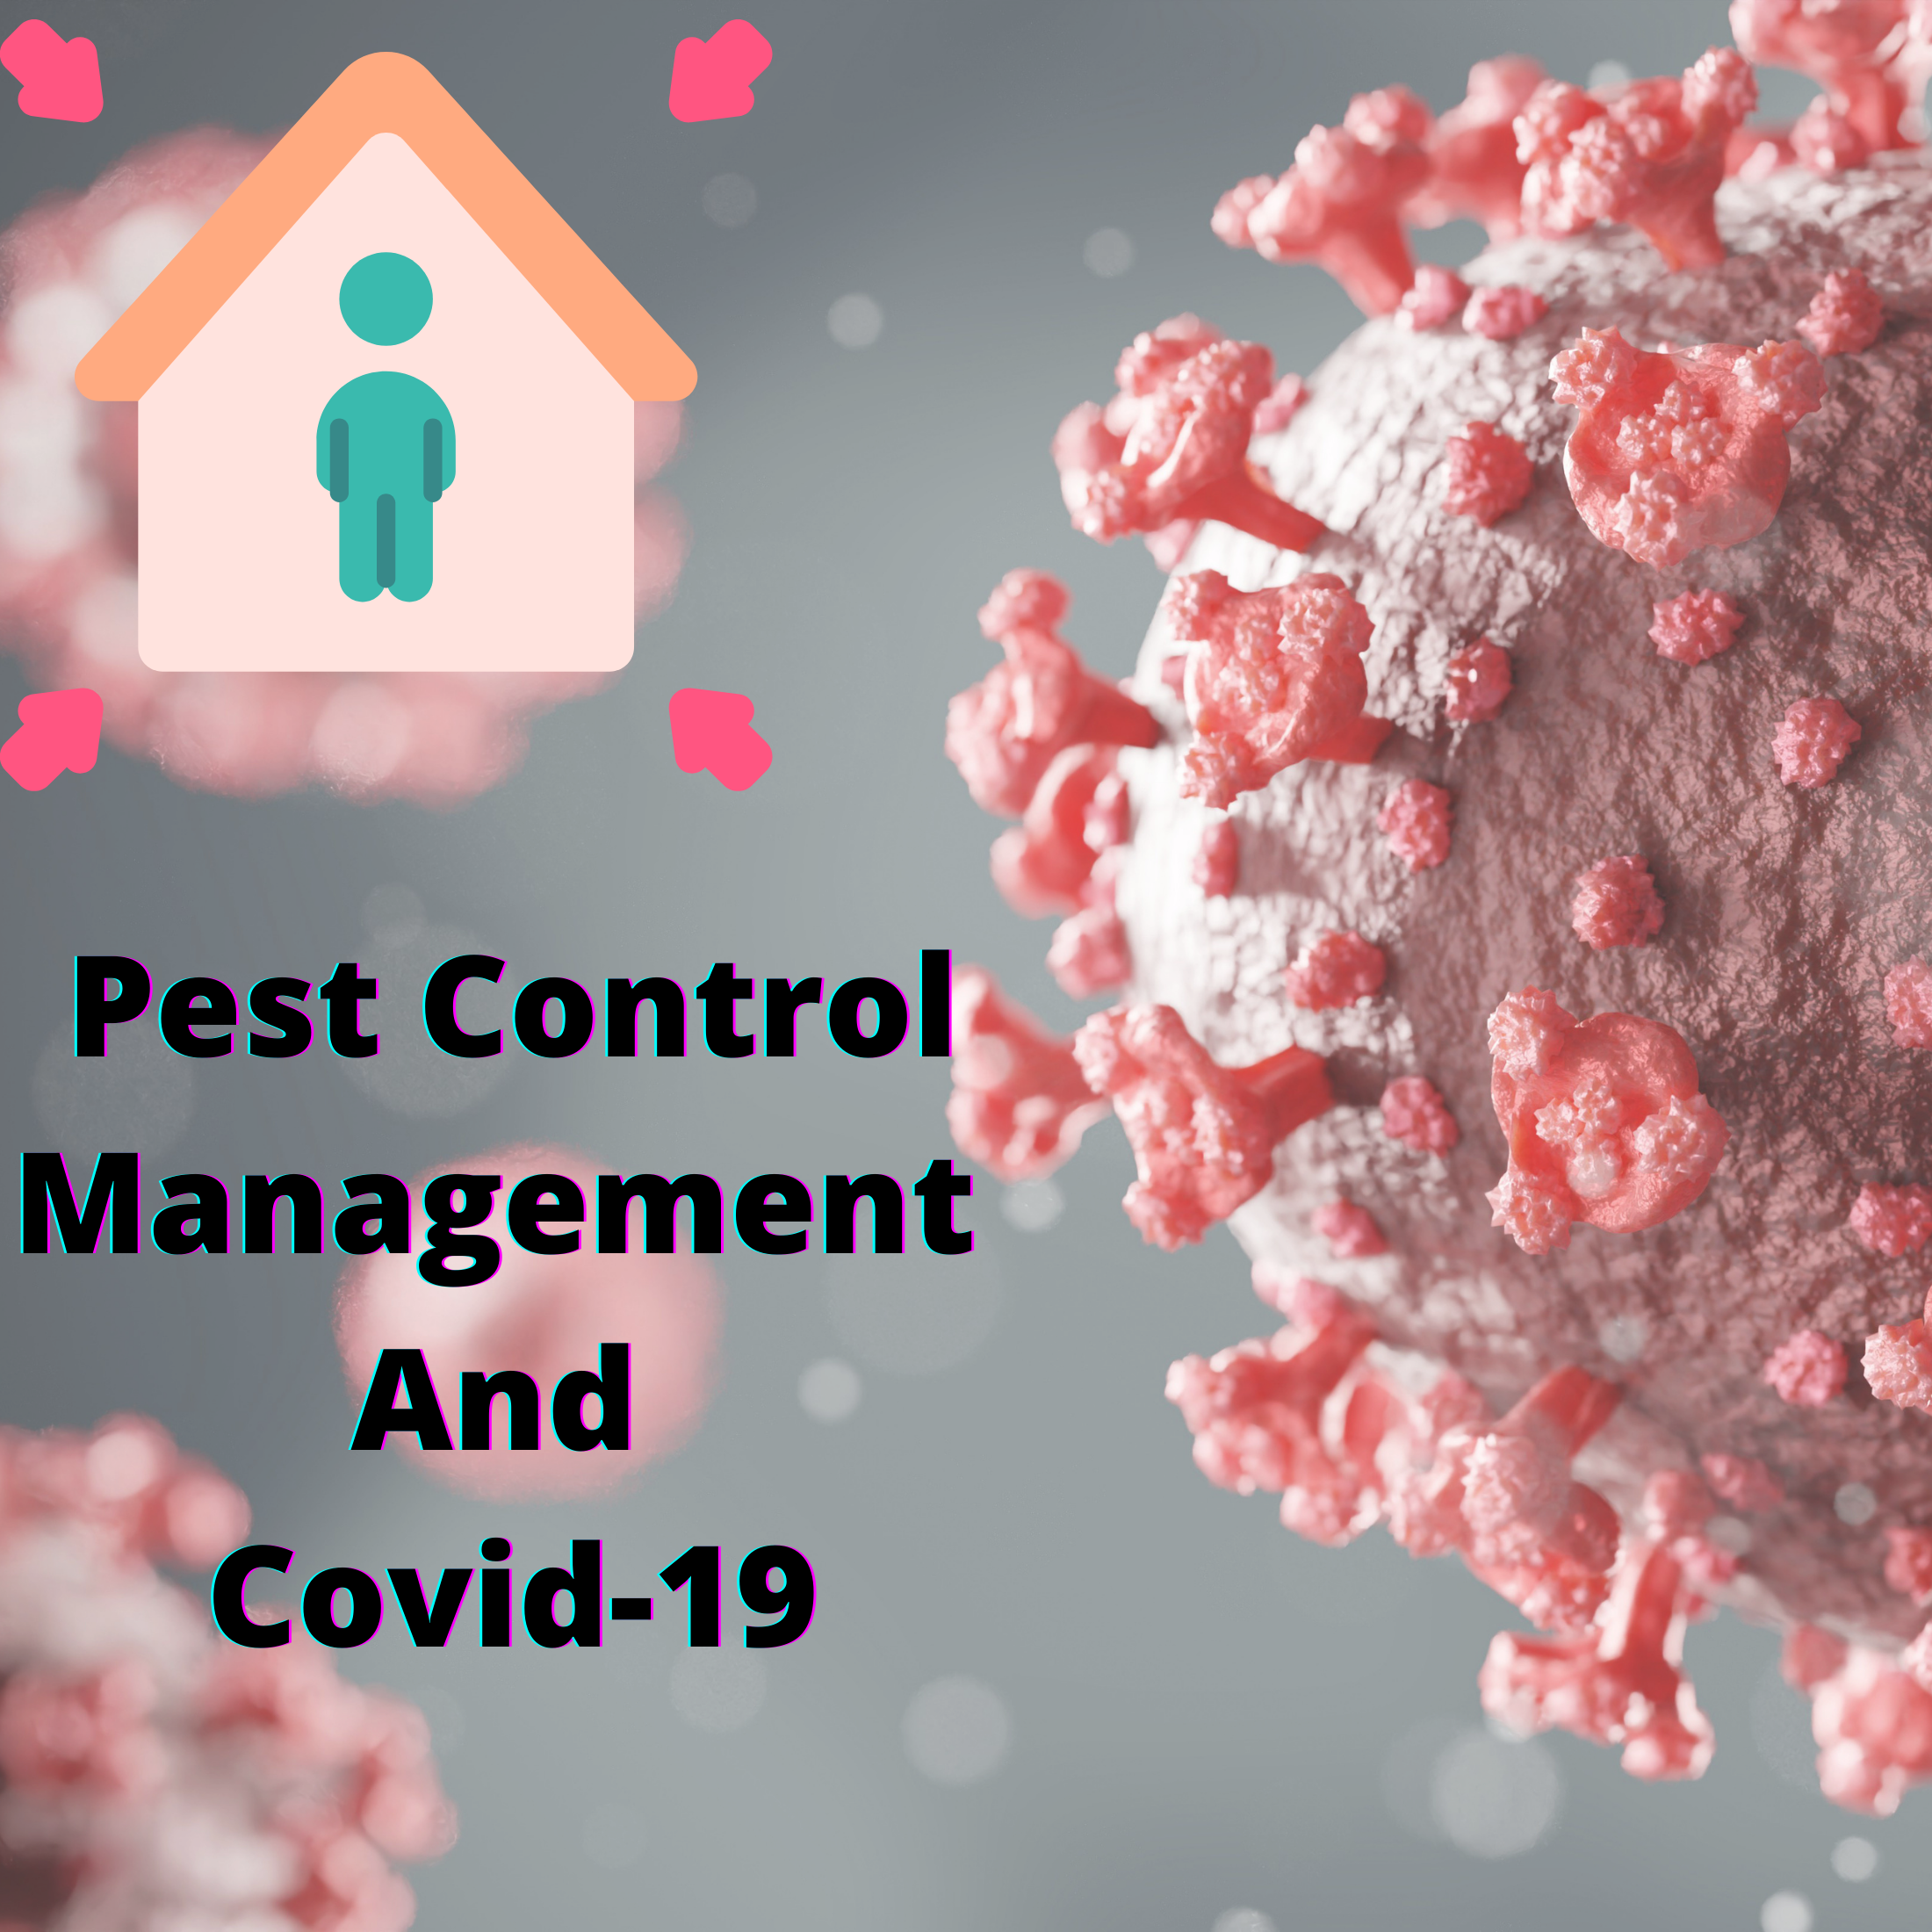 Post covid-19 Pest Control Necessary or not